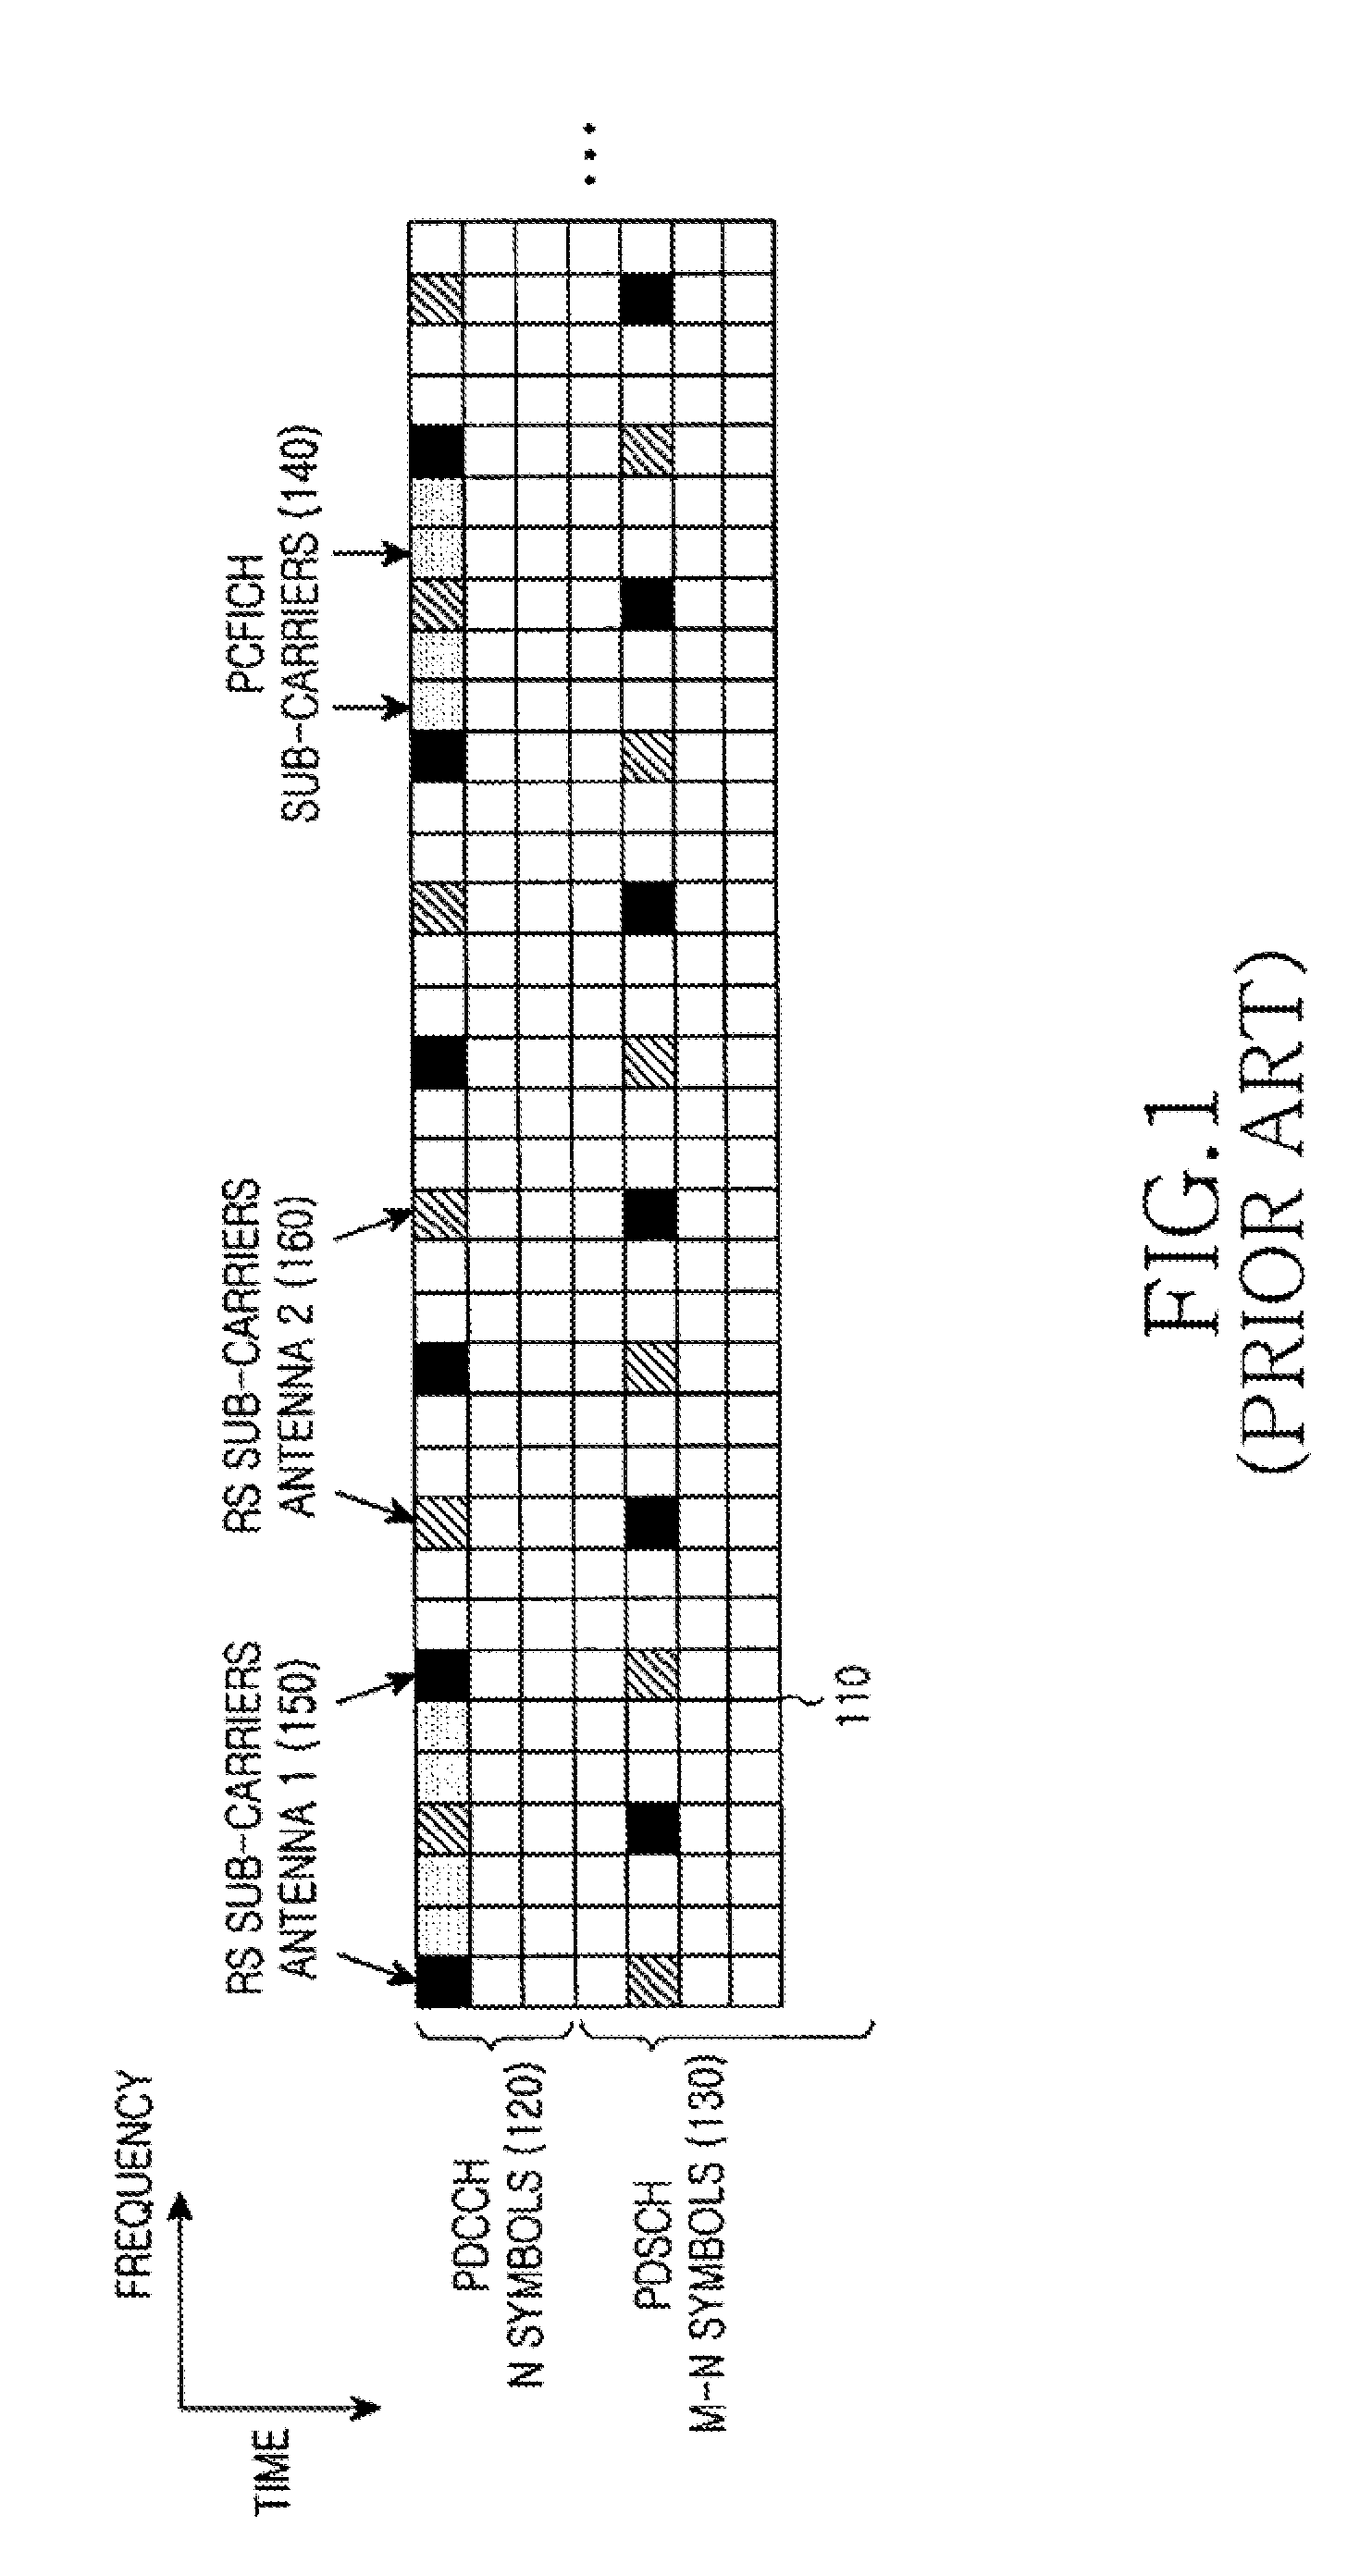 Transmission of scheduling assignments in multiple operating bandwidths